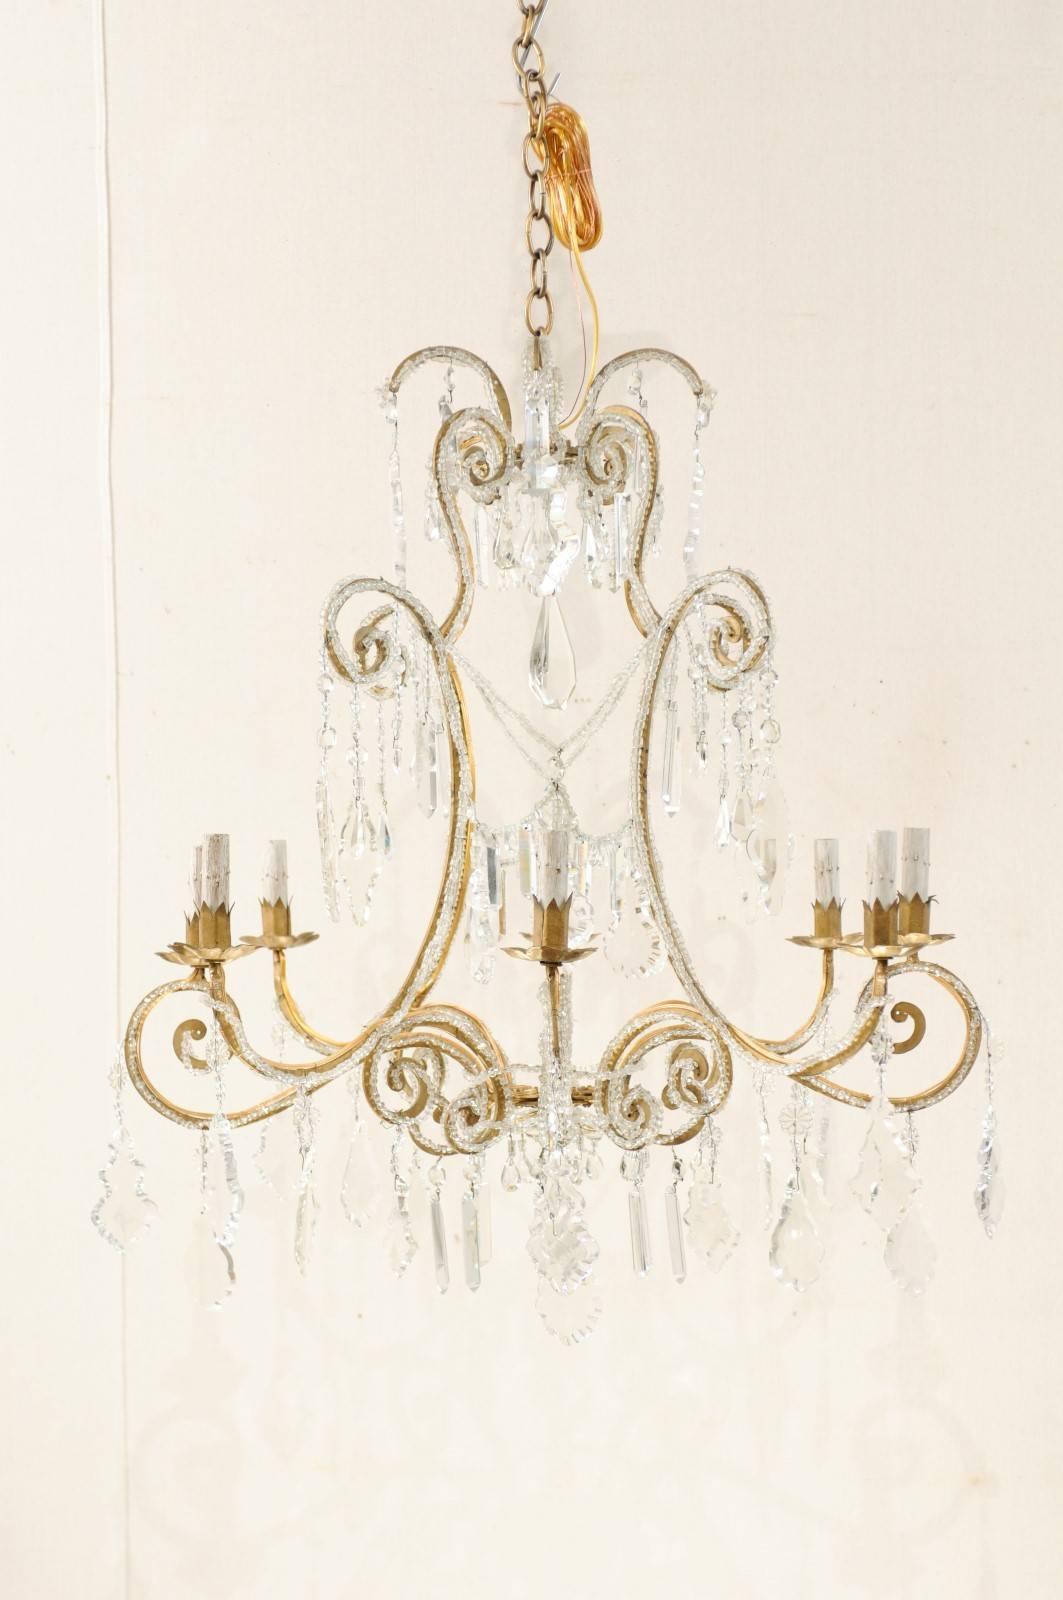 An vintage Italian crystal eight-light chandelier with scroll arms. This Mid-Century Italian gilded iron chandelier, with it's open and airy feel, is adorn with a collection of various crystals and various 